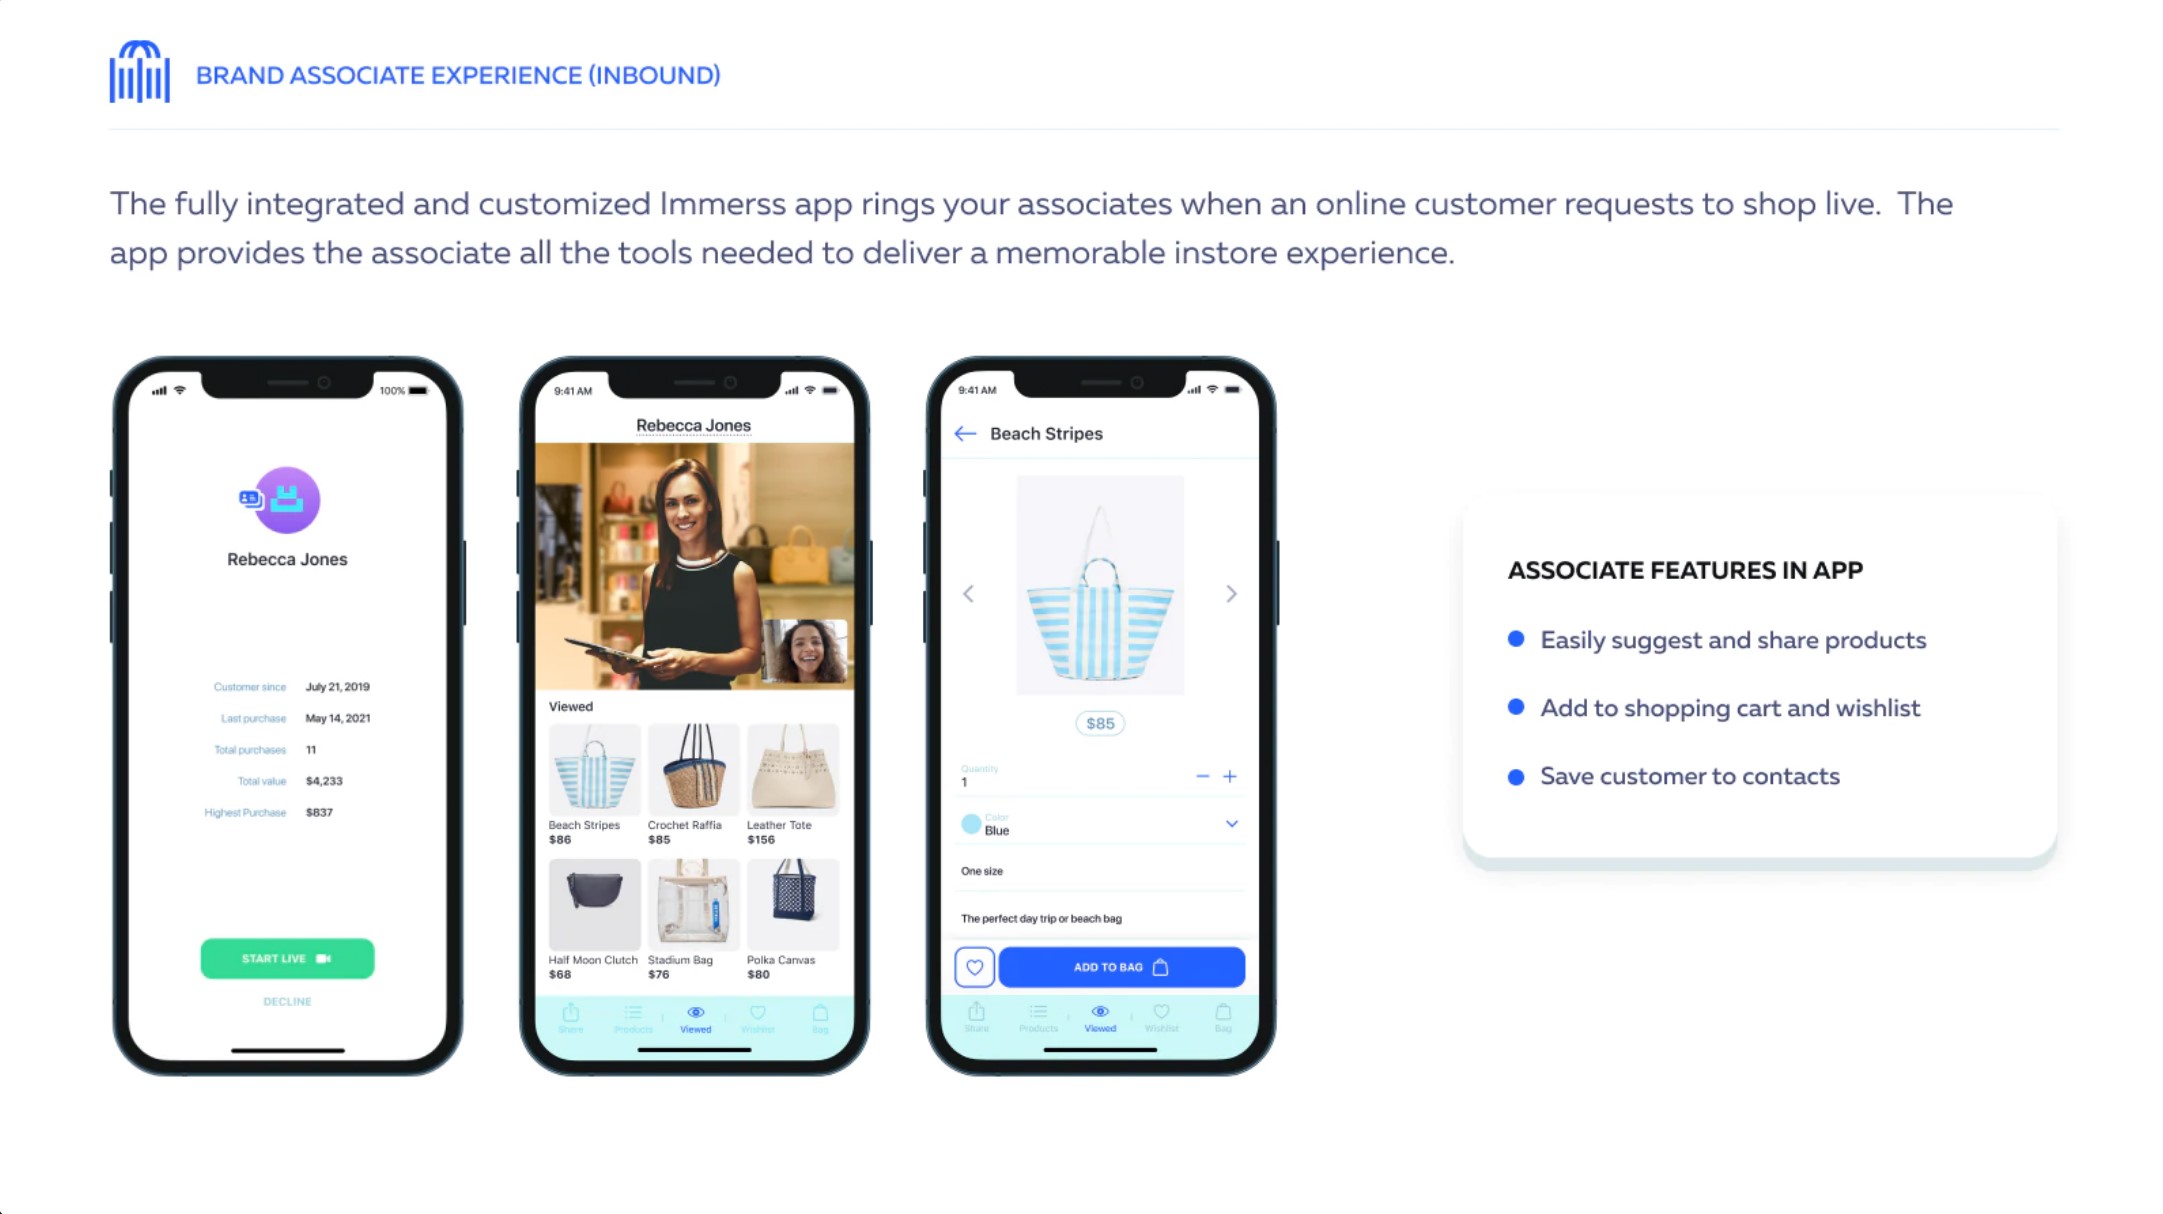 The Immerss app enables brand experts to answer customer product questions conveniently from anywhere